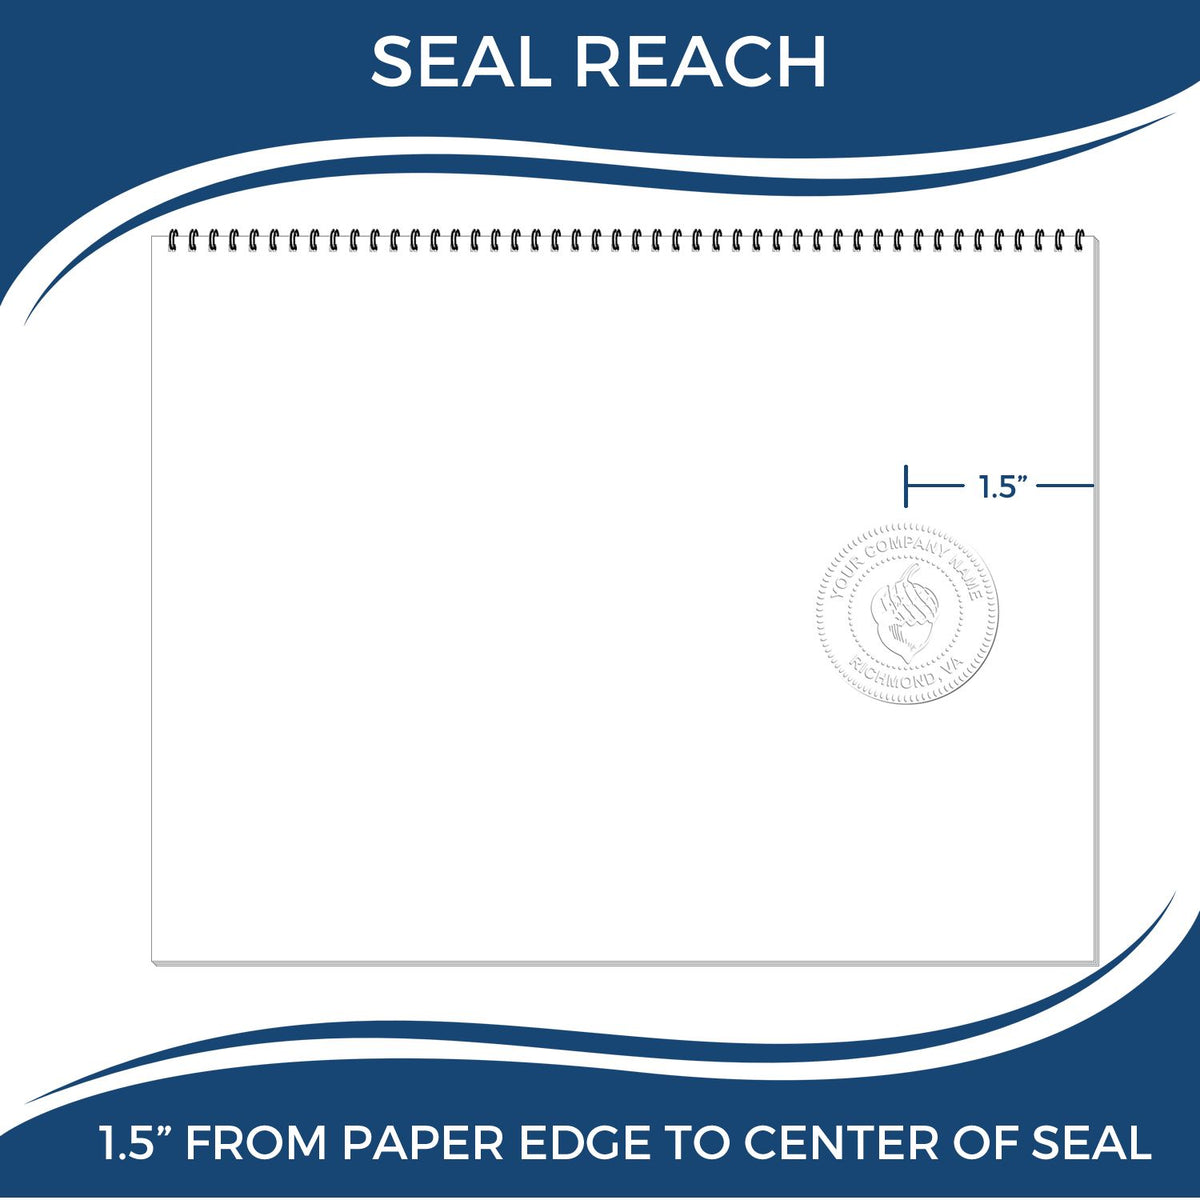 An infographic showing the seal reach which is represented by a ruler and a miniature seal image of the Gift Tennessee Landscape Architect Seal